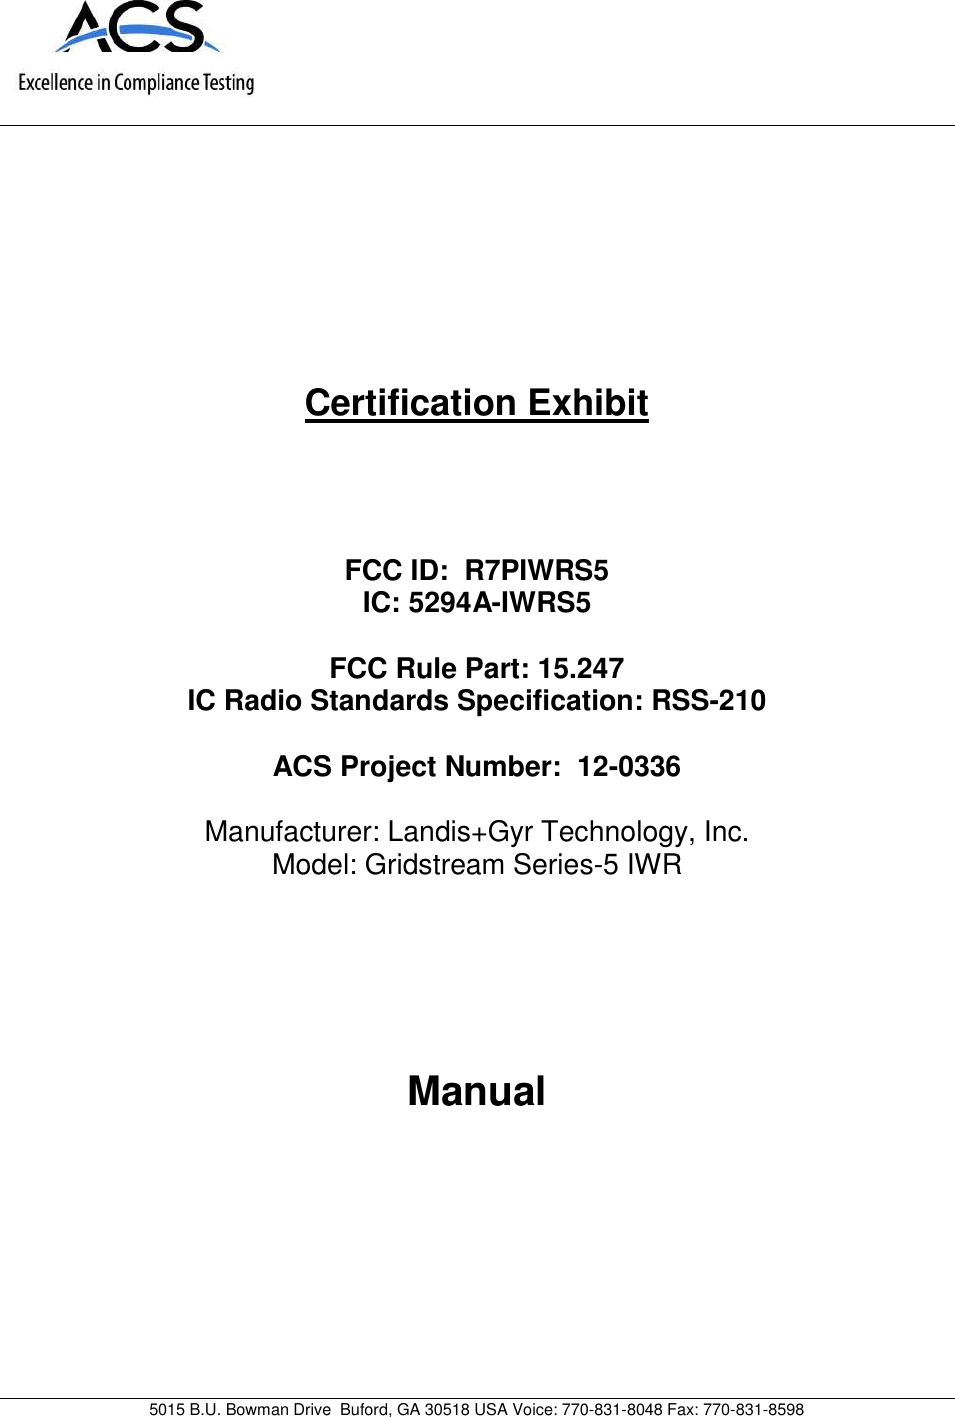 5015 B.U. Bowman Drive Buford, GA 30518 USA Voice: 770-831-8048 Fax: 770-831-8598Certification ExhibitFCC ID: R7PIWRS5IC: 5294A-IWRS5FCC Rule Part: 15.247IC Radio Standards Specification: RSS-210ACS Project Number: 12-0336Manufacturer: Landis+Gyr Technology, Inc.Model: Gridstream Series-5 IWRManual